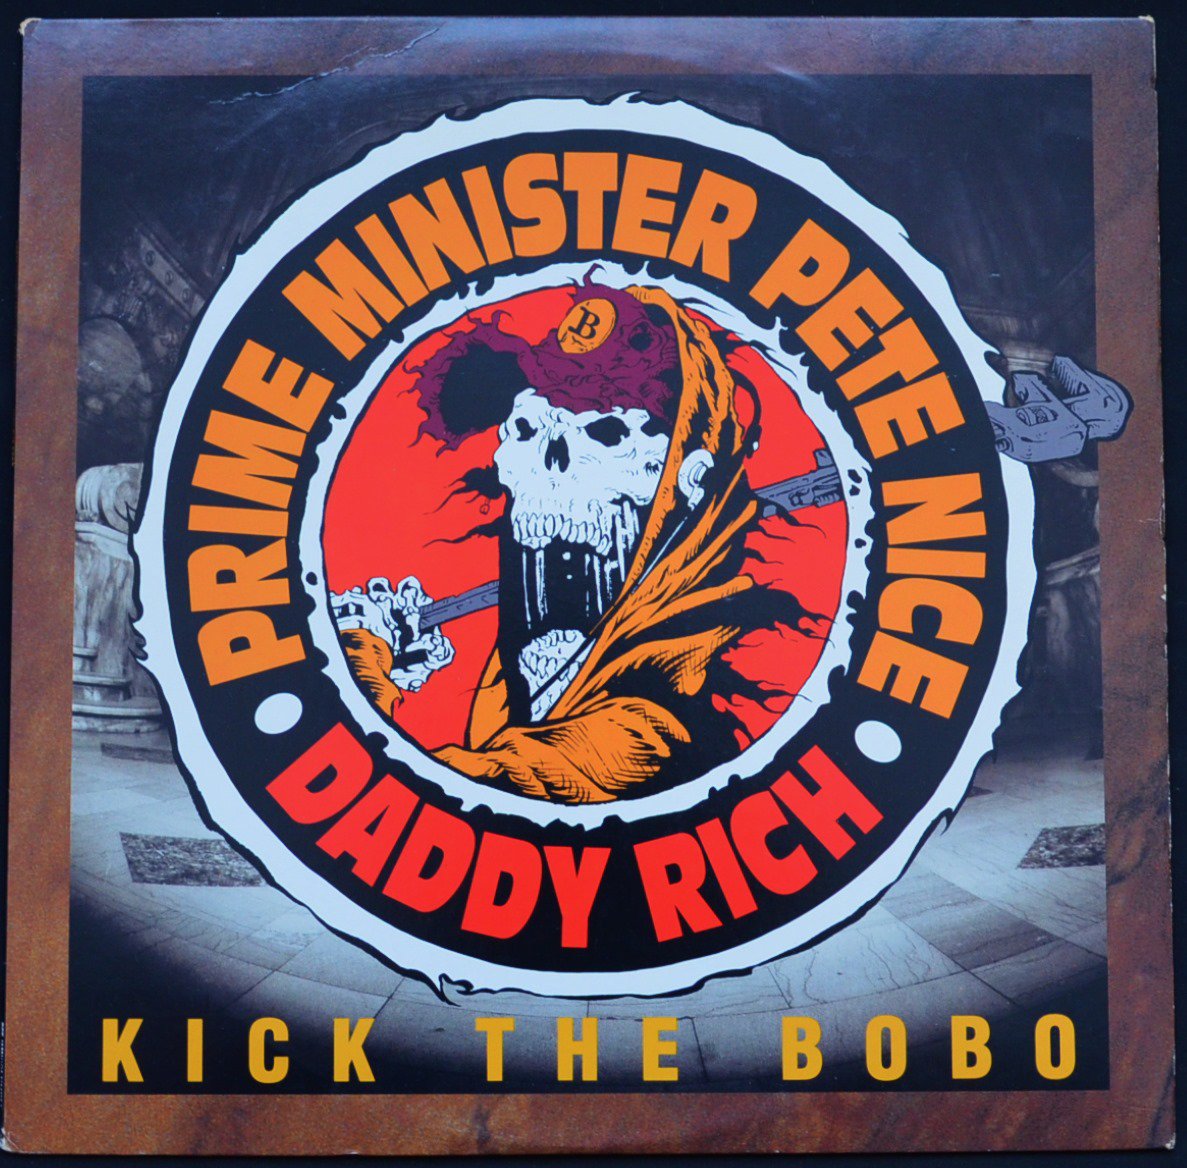 PRIME MINISTER PETE NICE & DADDY RICH ‎/ KICK THE BOBO / VERBAL MASSAGE (PART II) (12